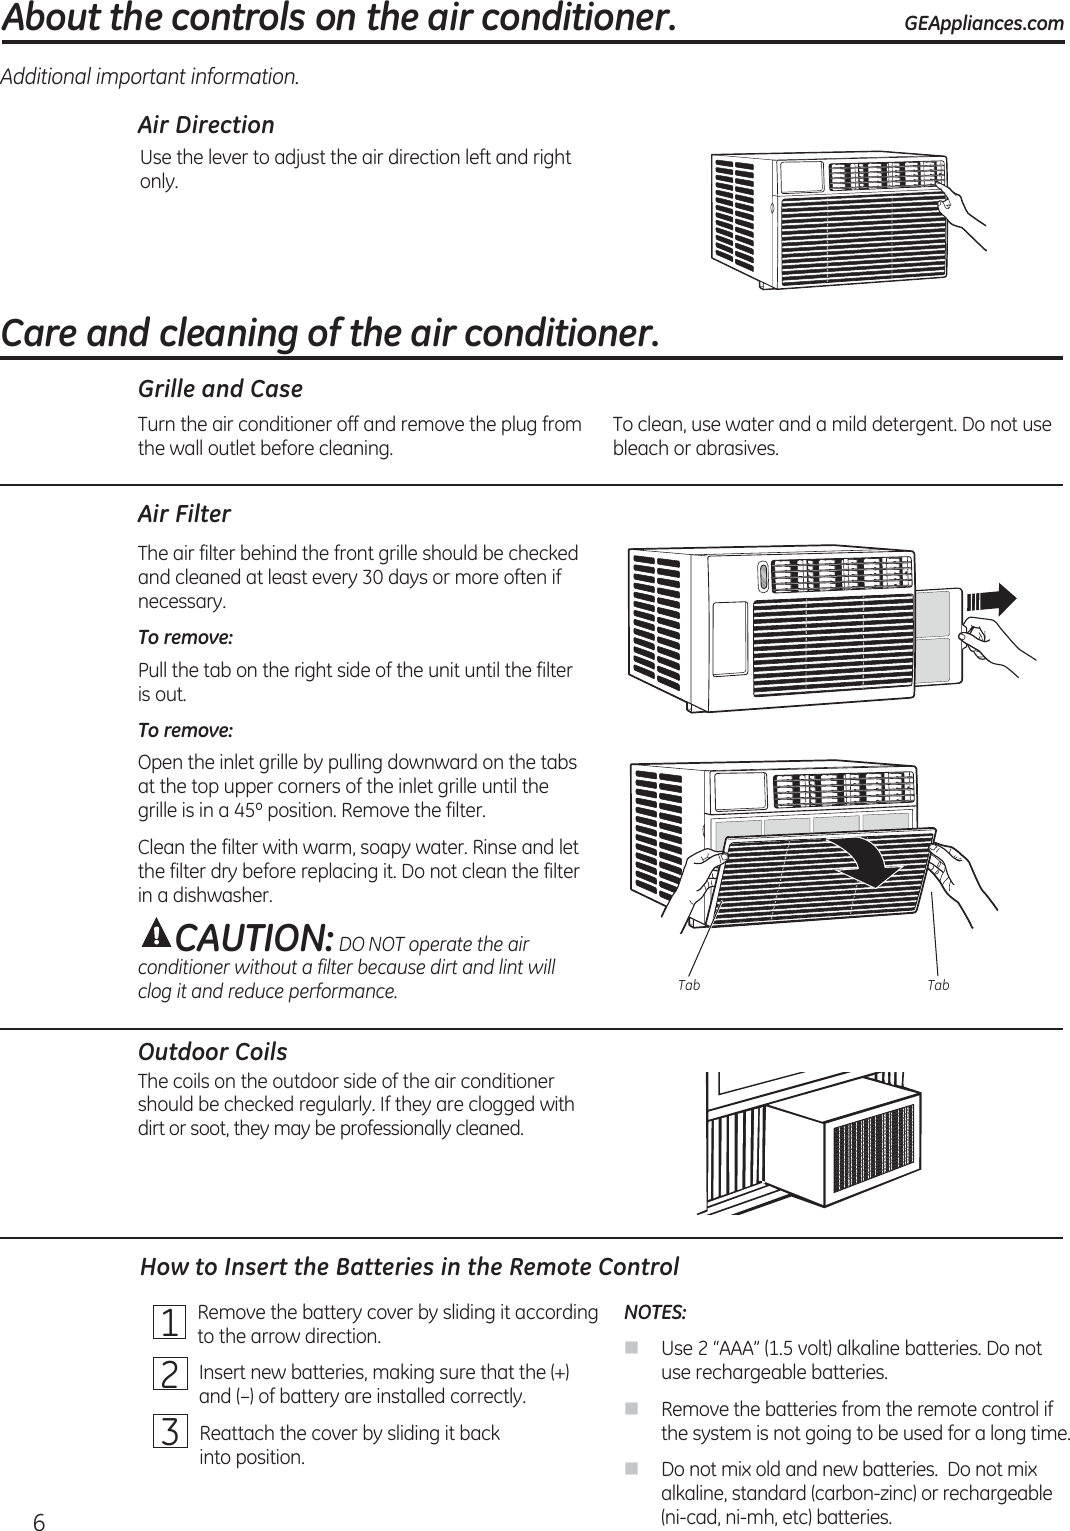 Air DirectionUse the lever to adjust the air direction left and right only.Additional important information.Air FilterThe air filter behind the front grille should be checked and cleaned at least every 30 days or more often if necessary.To remove: Pull the tab on the right side of the unit until the filter is out.To remove: Open the inlet grille by pulling downward on the tabs at the top upper corners of the inlet grille until the grille is in a 45º position. Remove the filter.Clean the filter with warm, soapy water. Rinse and let the filter dry before replacing it. Do not clean the filter in a dishwasher.CAUTION: DO NOT operate the air conditioner without a filter because dirt and lint will clog it and reduce performance.Outdoor CoilsThe coils on the outdoor side of the air conditioner should be checked regularly. If they are clogged with dirt or soot, they may be professionally cleaned.About the controls on the air conditioner. GEAppliances.comTurn the air conditioner off and remove the plug from the wall outlet before cleaning. To clean, use water and a mild detergent. Do not use bleach or abrasives.Grille and CaseHow to Insert the Batteries in the Remote ControlCare and cleaning of the air conditioner.Tab Tab1   Remove the battery cover by sliding it according to the arrow direction.2   Insert new batteries, making sure that the (+) and (–) of battery are installed correctly.3   Reattach the cover by sliding it back  into position.NOTES: Use 2 “AAA” (1.5 volt) alkaline batteries. Do not use rechargeable batteries. Remove the batteries from the remote control if the system is not going to be used for a long time. Do not mix old and new batteries.  Do not mix alkaline, standard (carbon-zinc) or rechargeable (ni-cad, ni-mh, etc) batteries.6